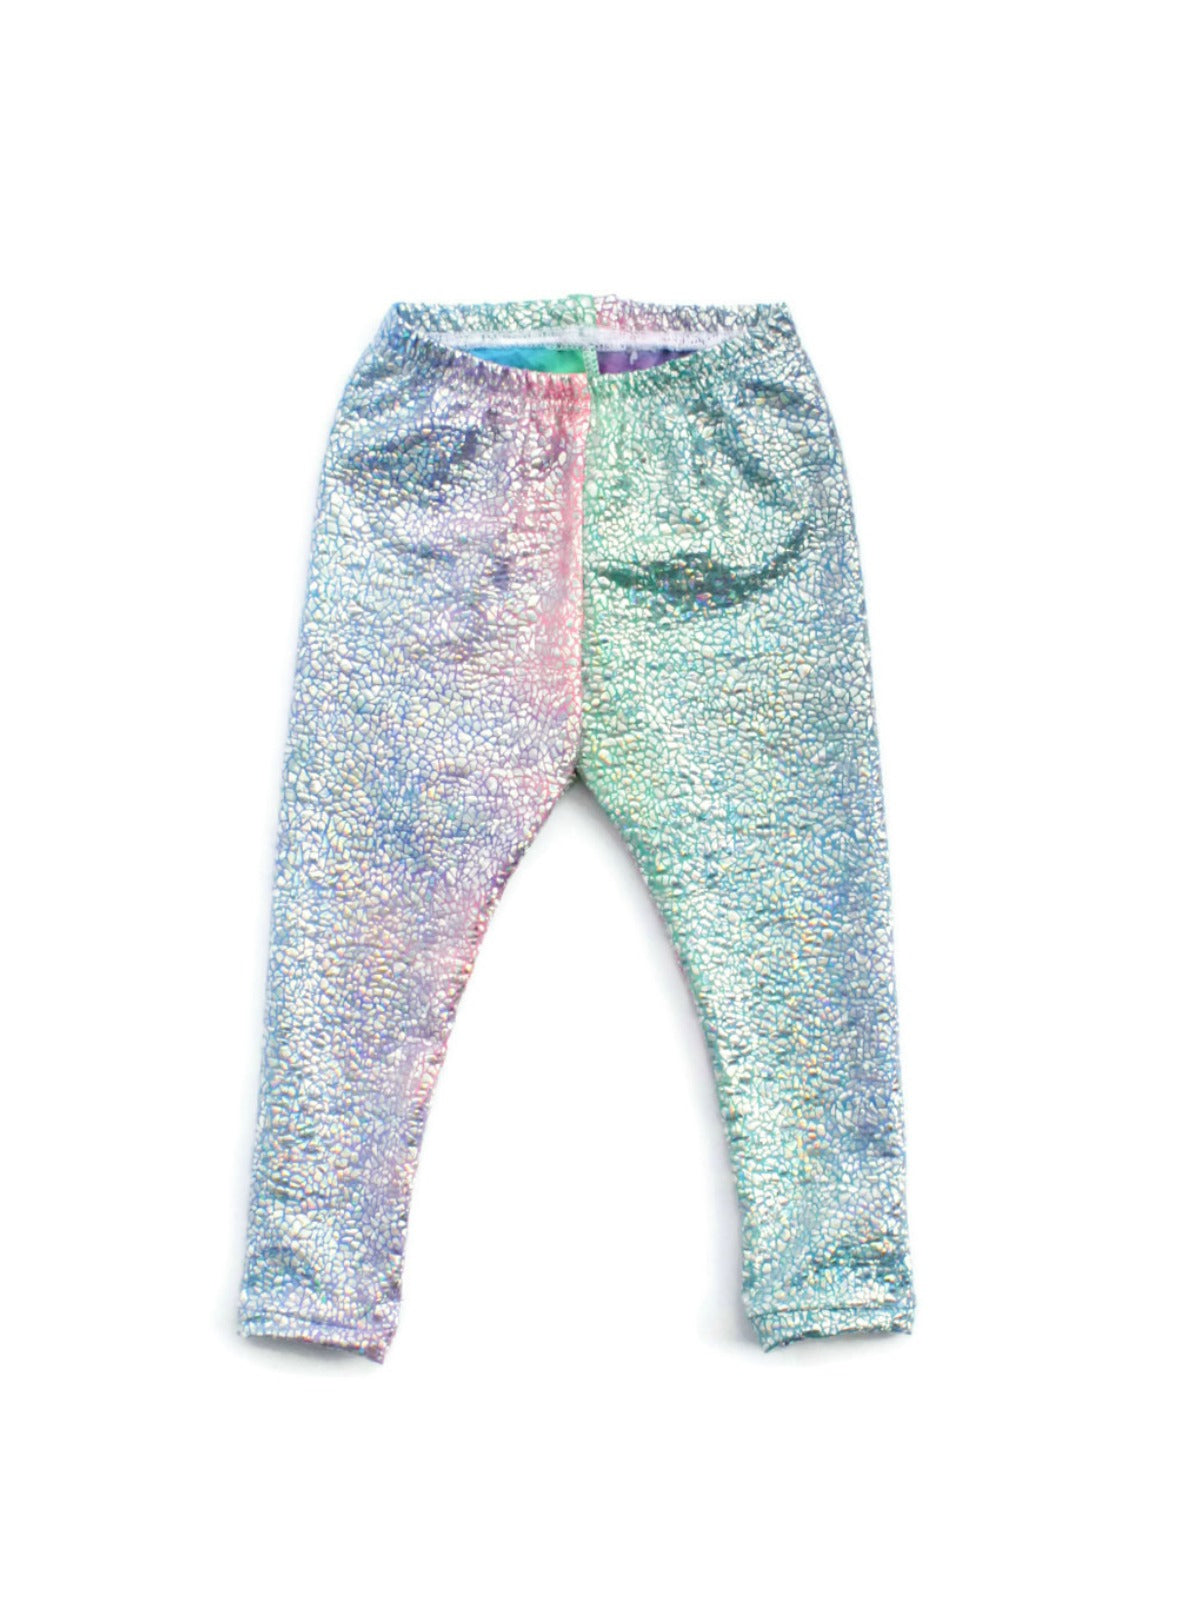 NWT CAT & Jack Toddler Girls' Teal with Sparkle Leggings, size 2T or 3T  $7.00 - PicClick